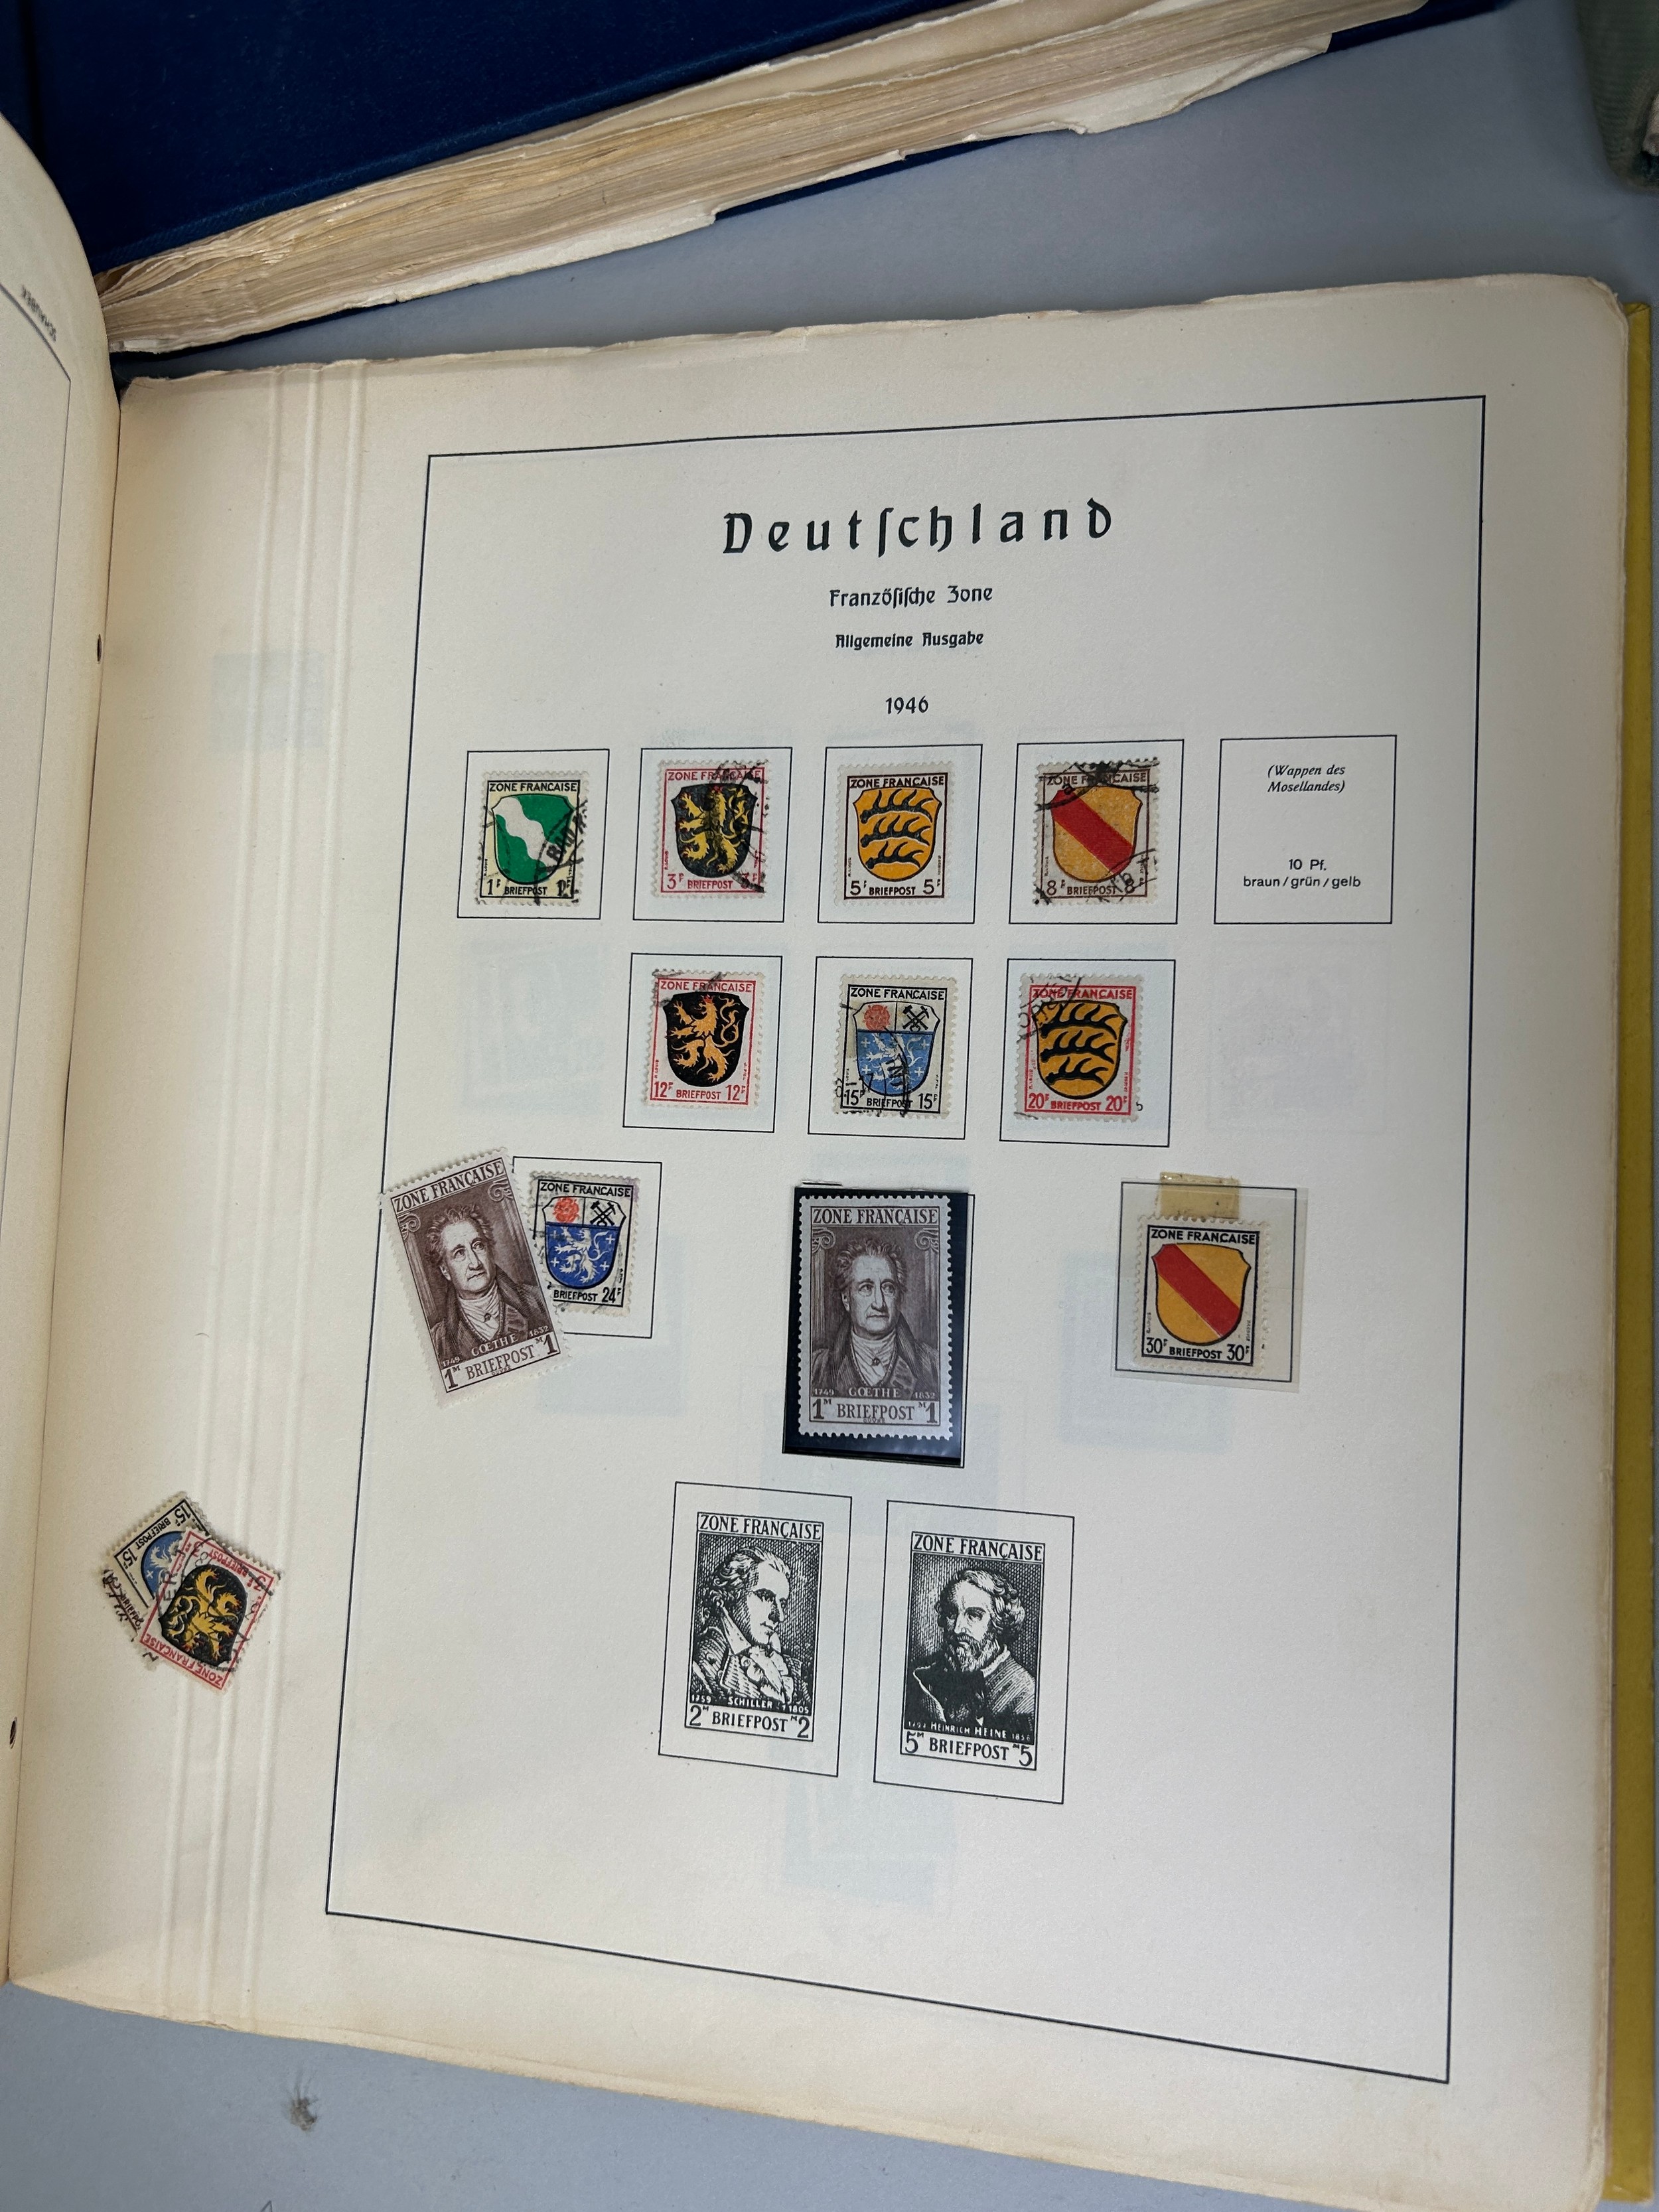 A COLLECTION OF DEUTSCHLAND STAMPS AND FIRST DAY COVERS HOUSED IN ALBUMS (QTY) - Image 4 of 9